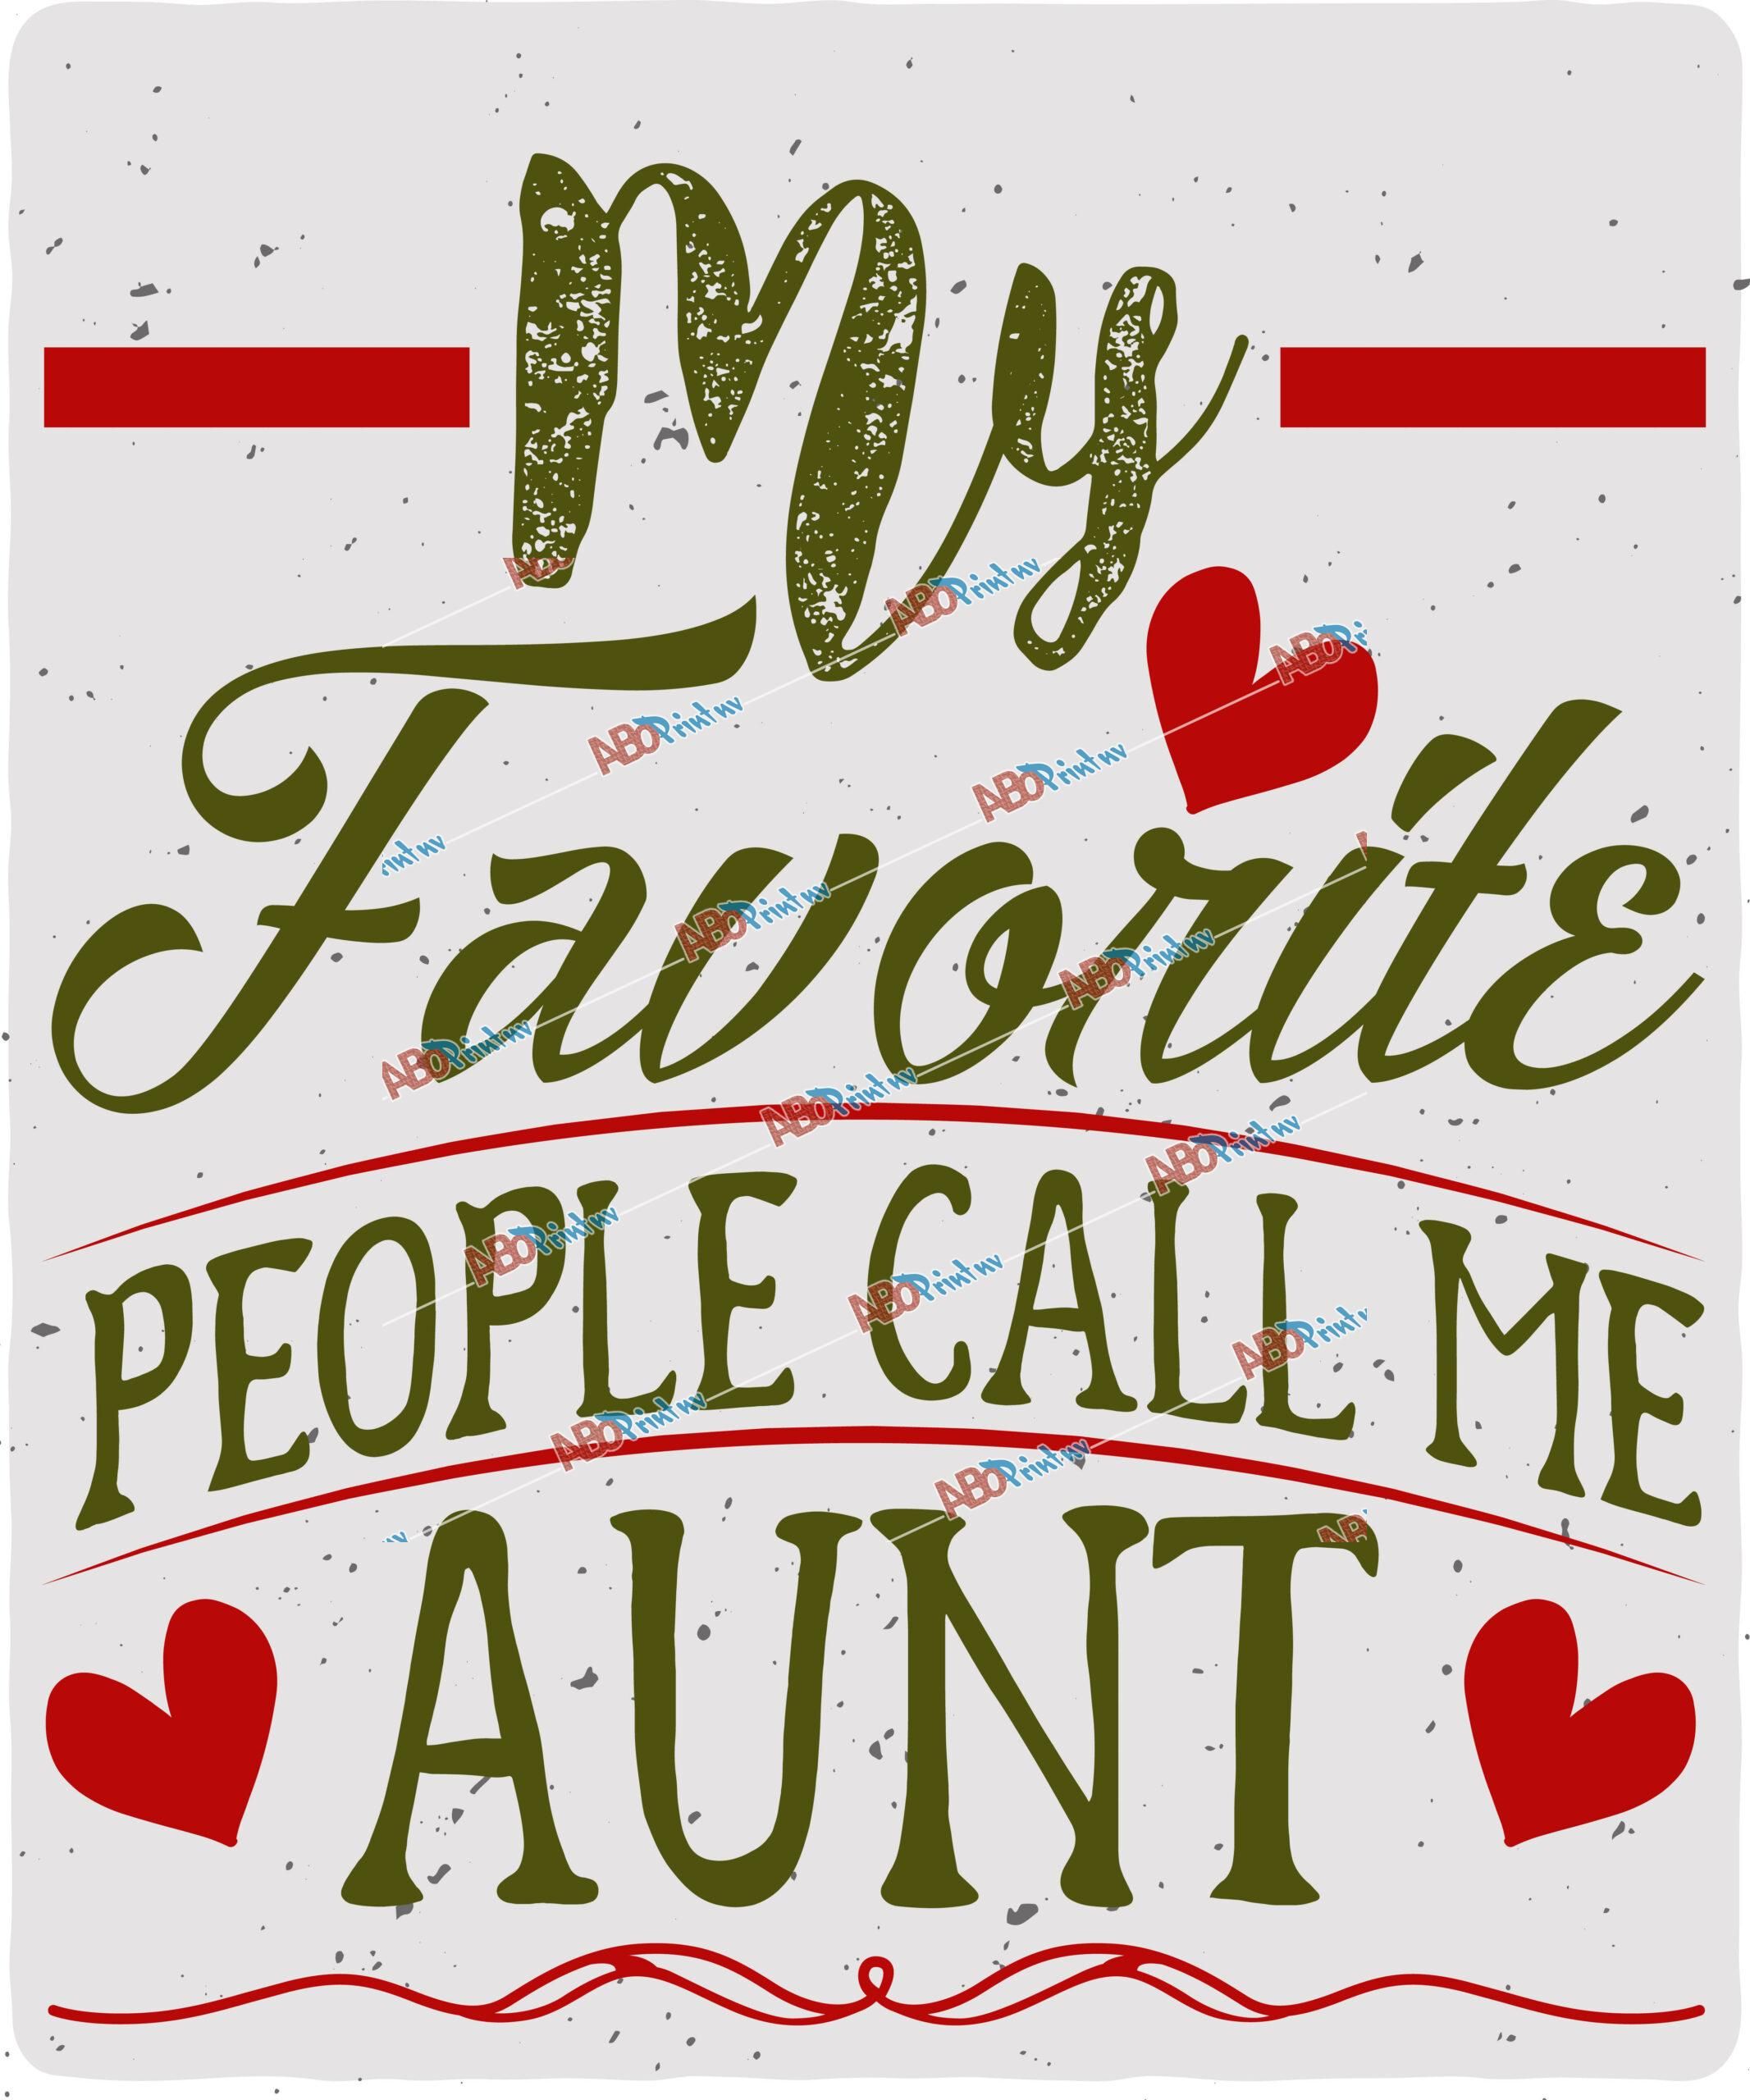 My favorite people call me aunt